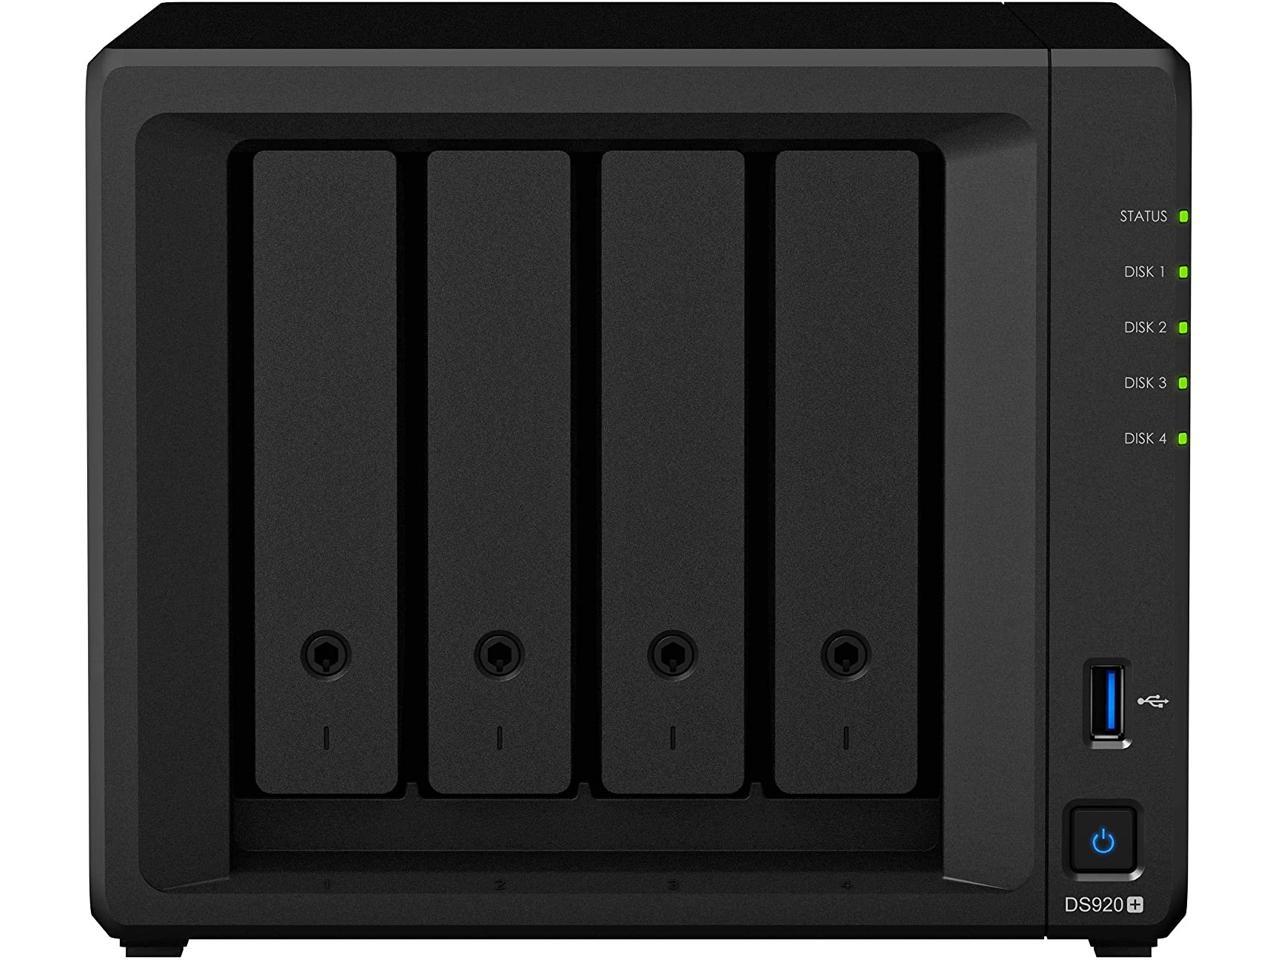 1TB M.2 SSD Synology DiskStation DS1520+ NAS Server for Business with Celeron CPU 10TB SSD Storage 8GB DDR4 Memory Synology DSM Operating System 